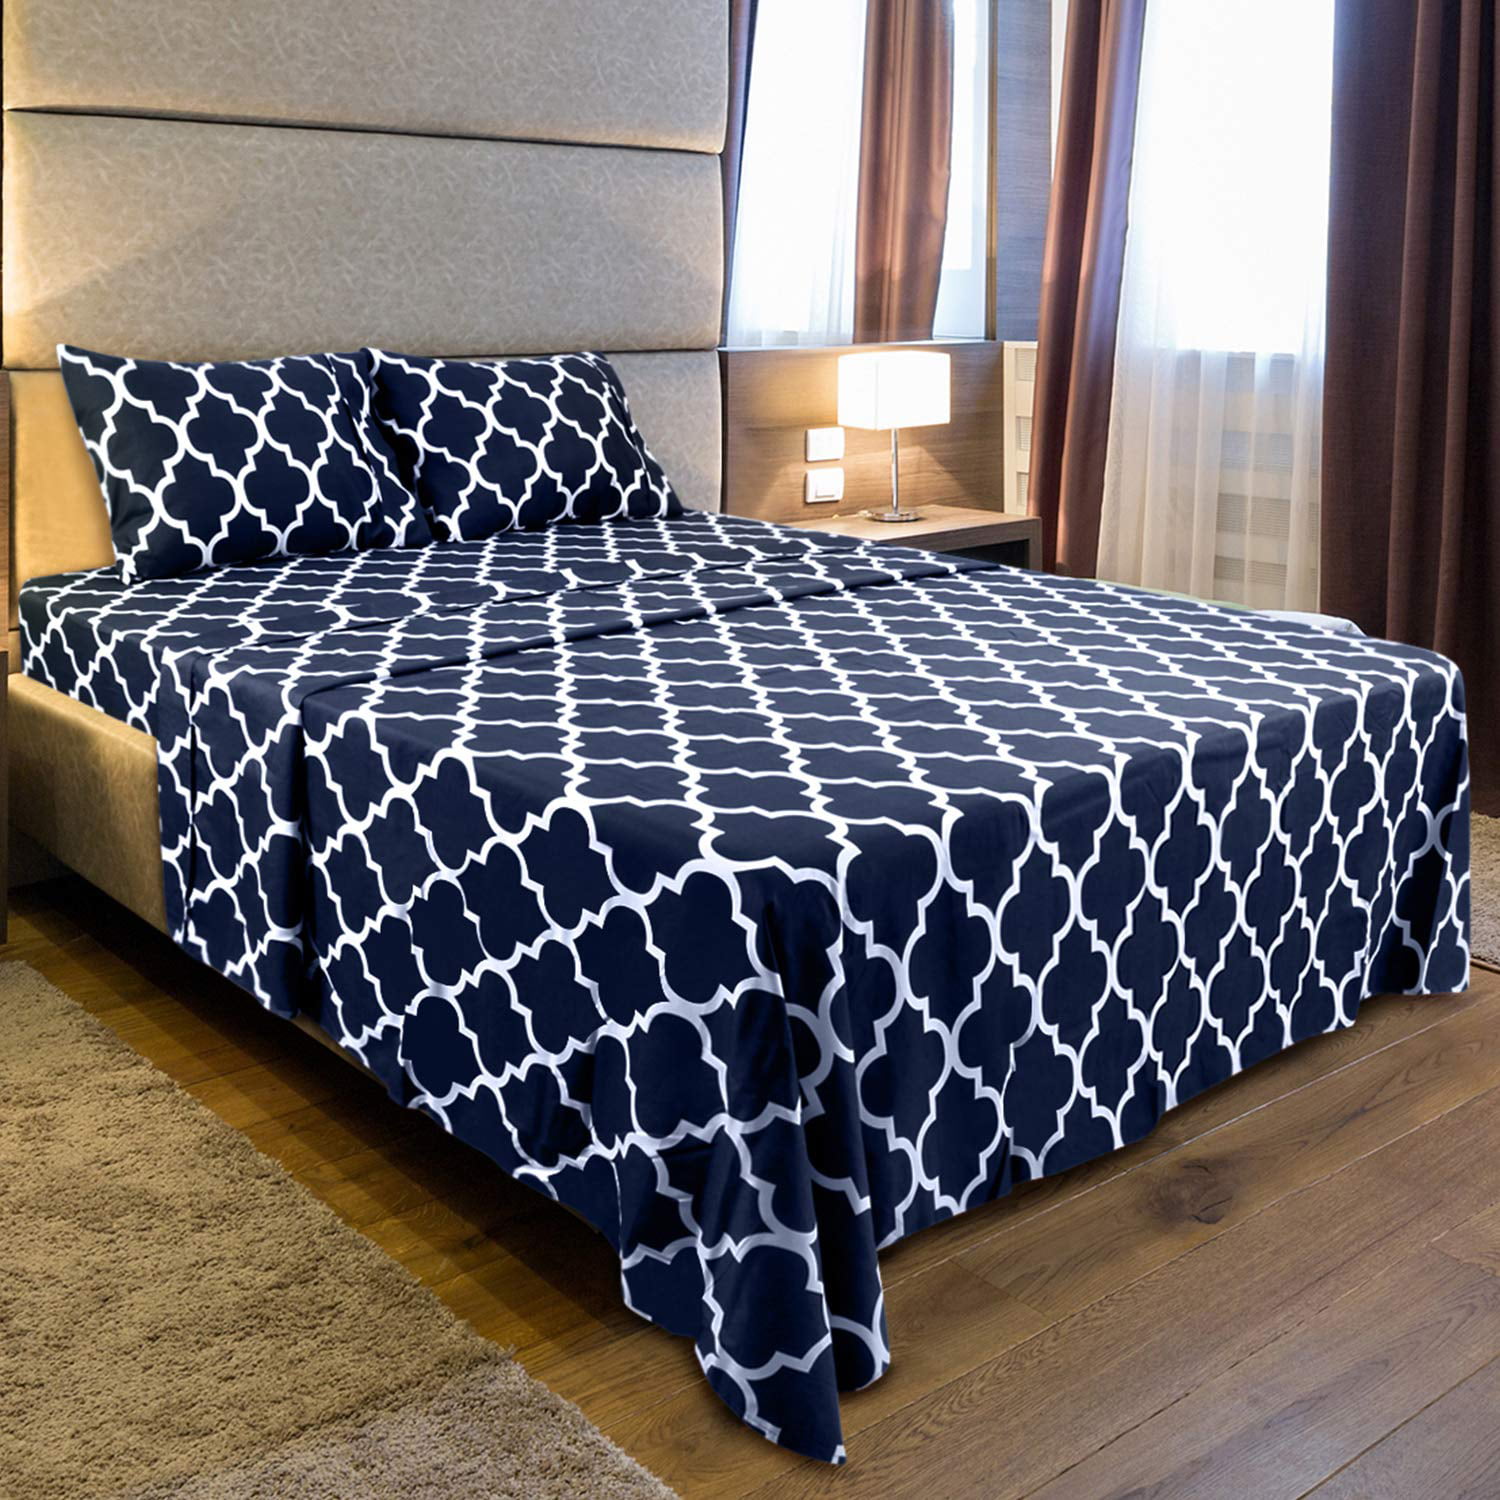 and 2 Pillow Cases 1 Flat Sheet Utopia Bedding 4 Piece Bed Sheet Set Full, Navy 1 Fitted Sheet